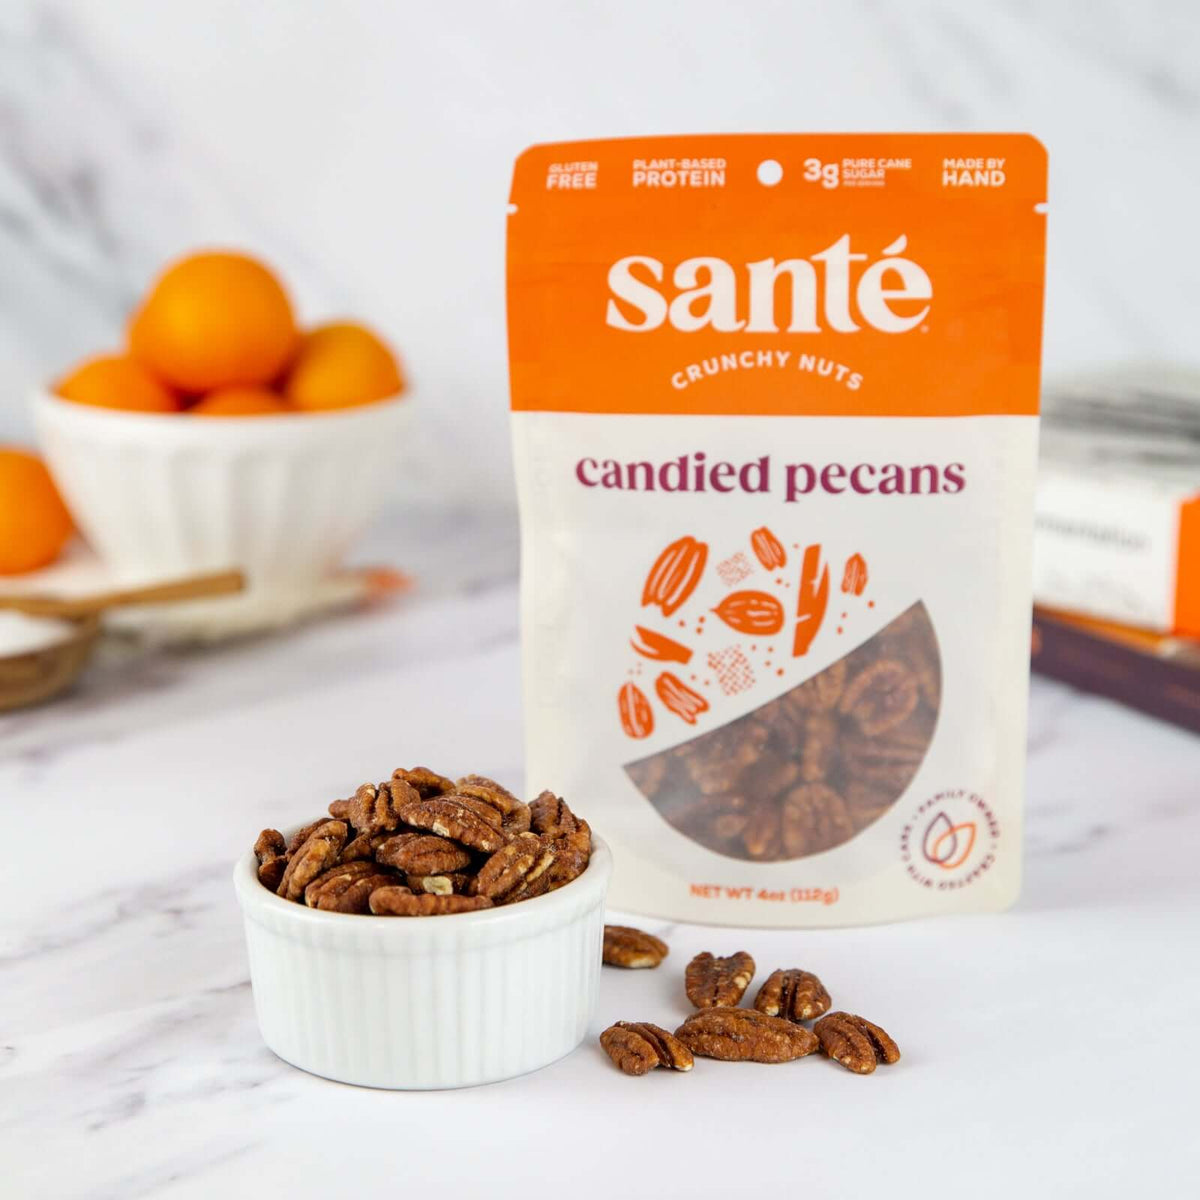 Candied Nuts batches | small Handcrafted Santé | in Pecans